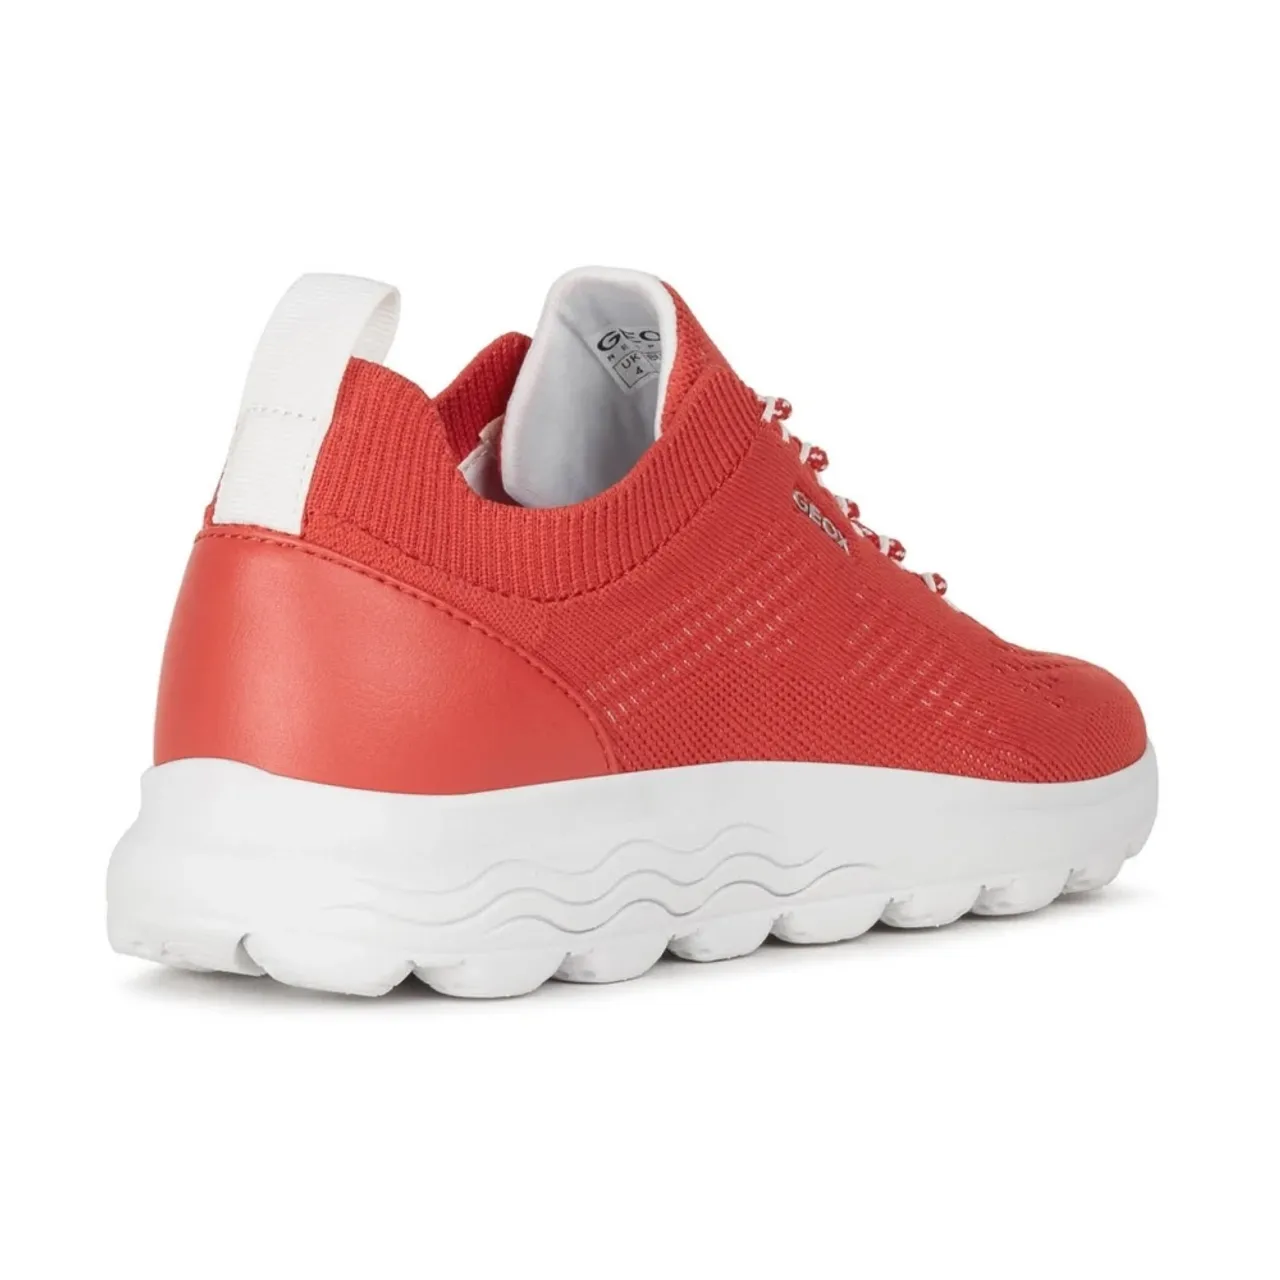 Geox , spherica shoes ,Red female, Sizes: